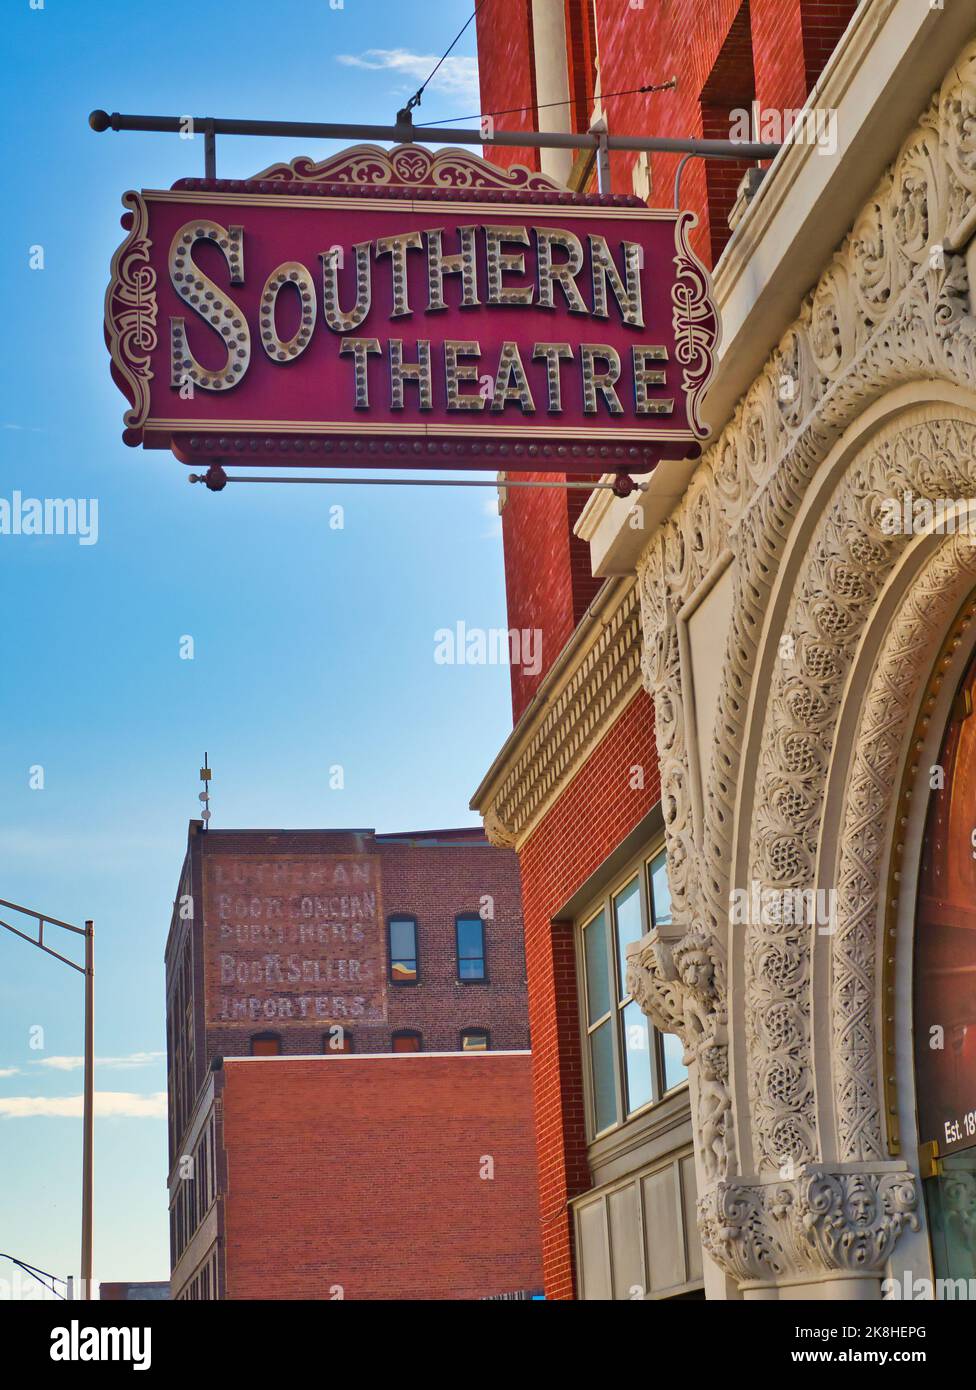 Sign for The Great Southern Hotel & Theatre in Columbus Ohio USA Stock Photo